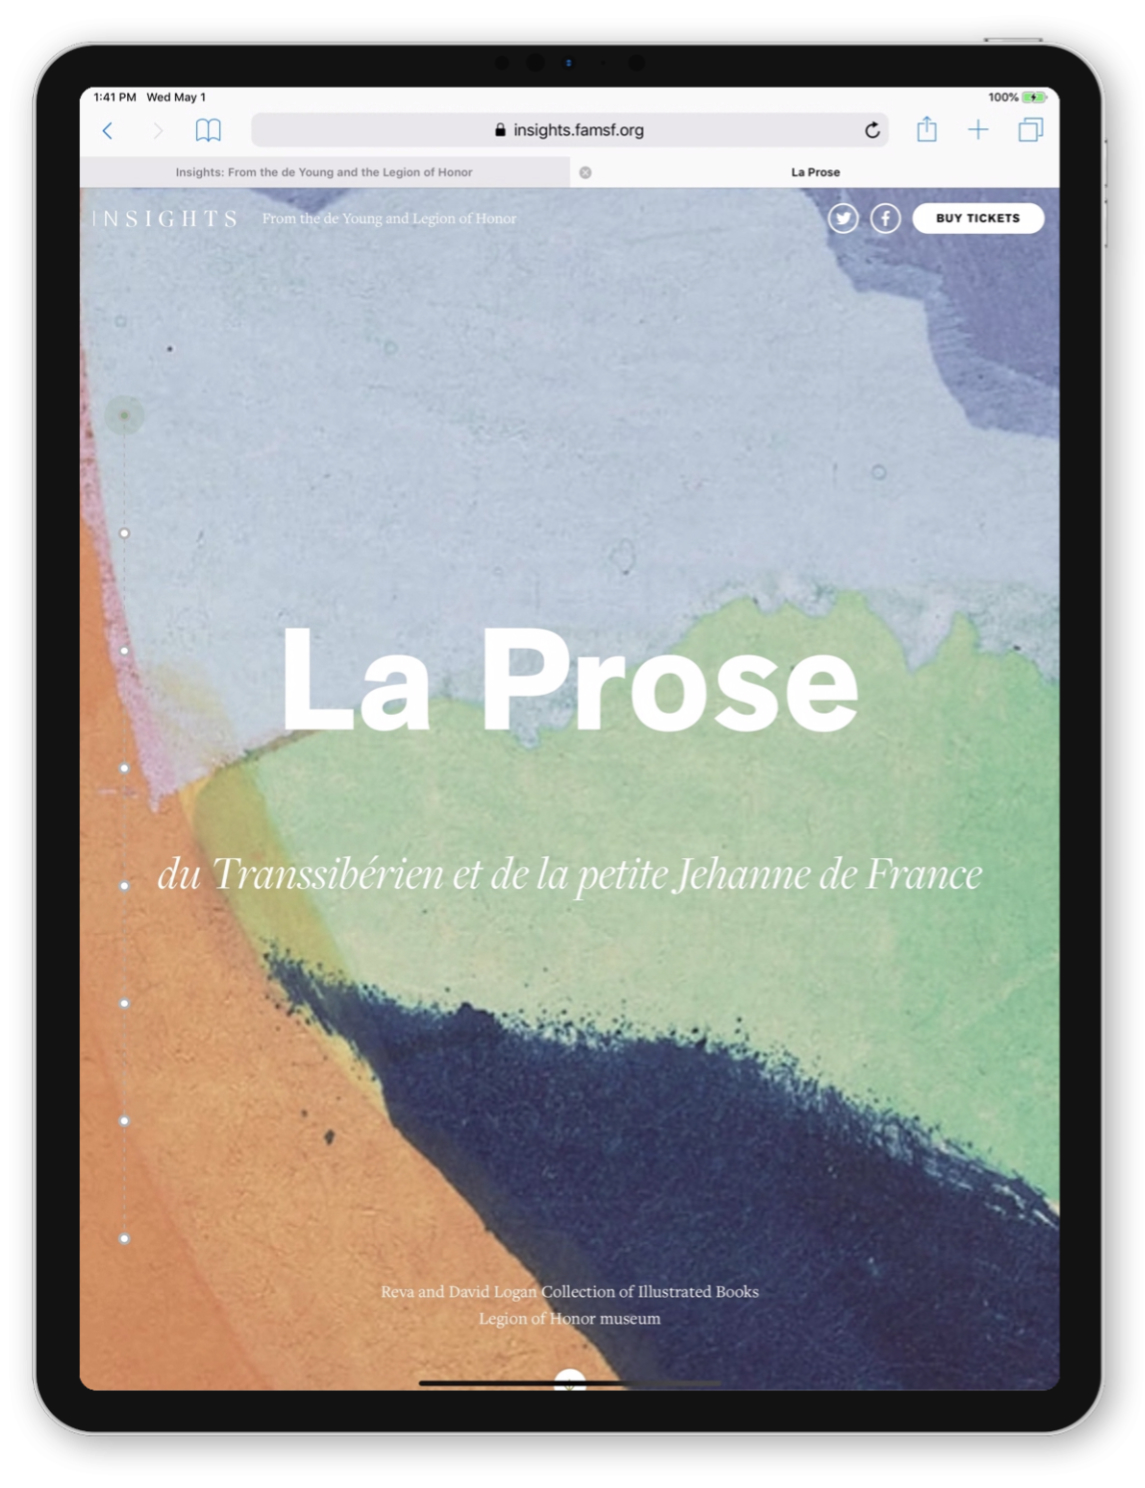 La-Prose insights story cover page.